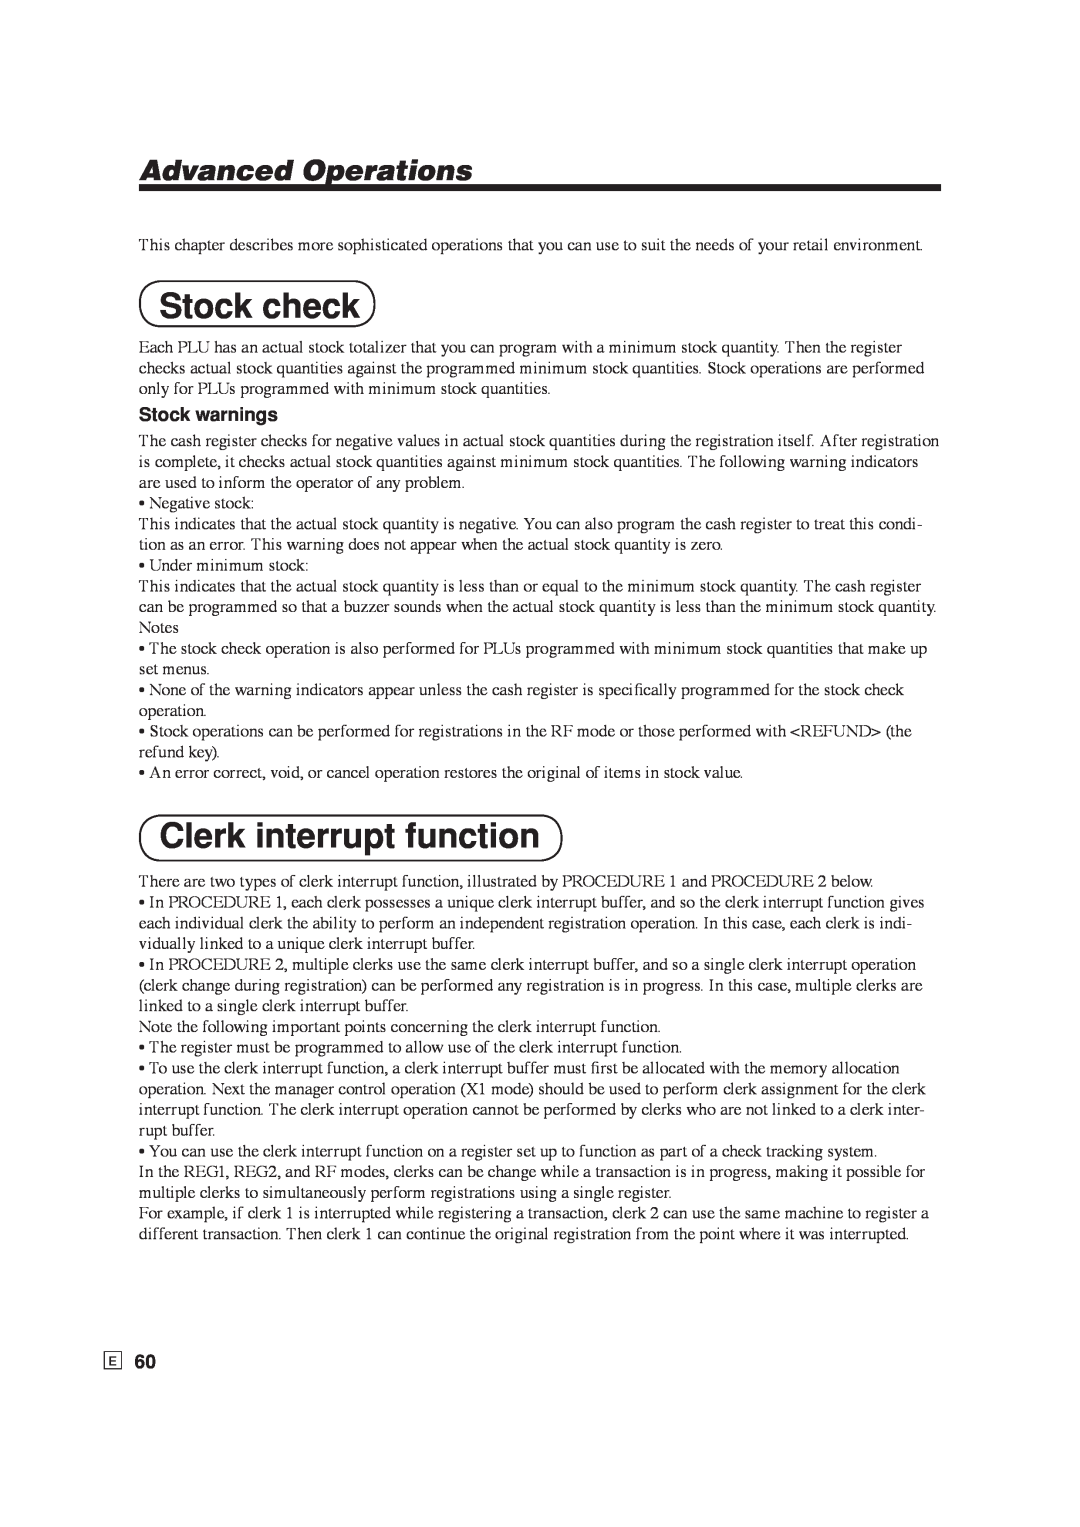 Casio SE-S6000, SE-C6000 user manual Stock check, Clerk interrupt function, Advanced Operations, Stock warnings 